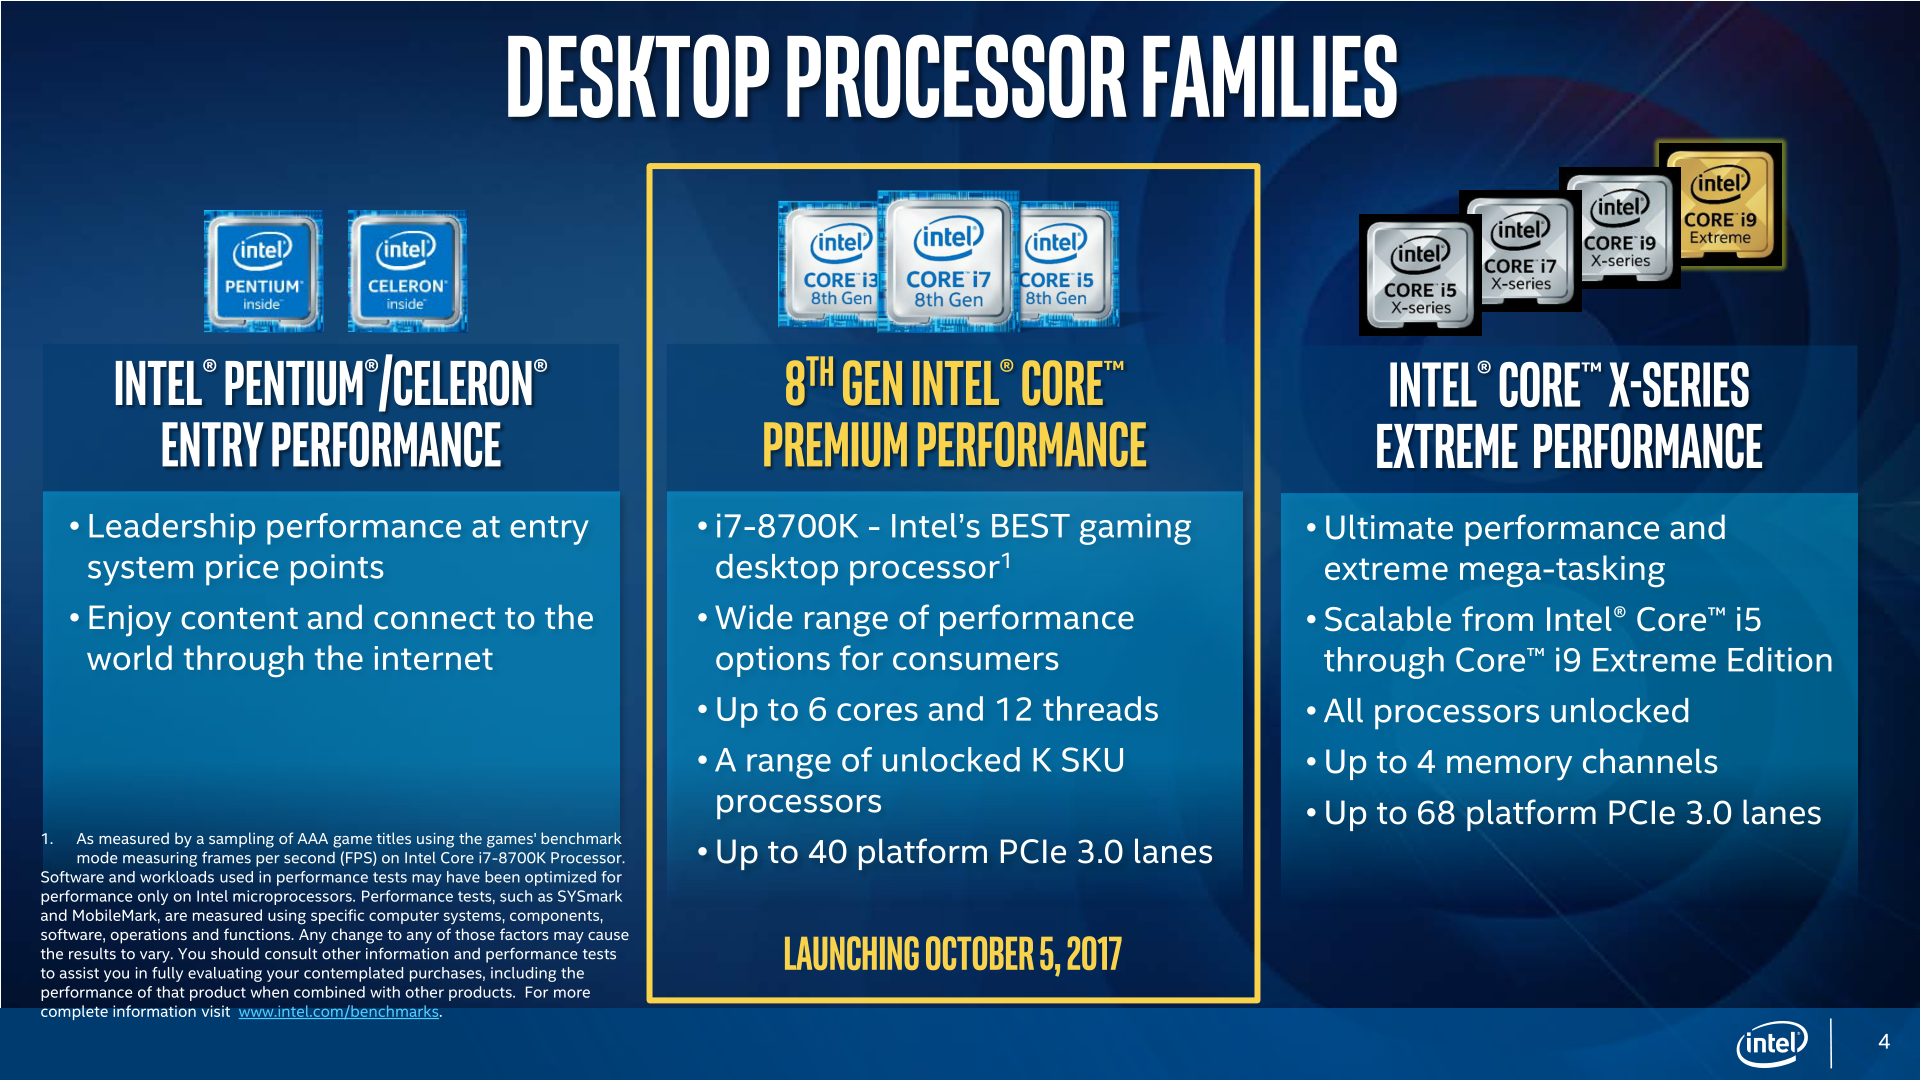 Hond Lelie Bestrooi Intel Announces 8th Generation Core "Coffee Lake" Desktop Processors:  Six-core i7, Four-core i3, and Z370 Motherboards